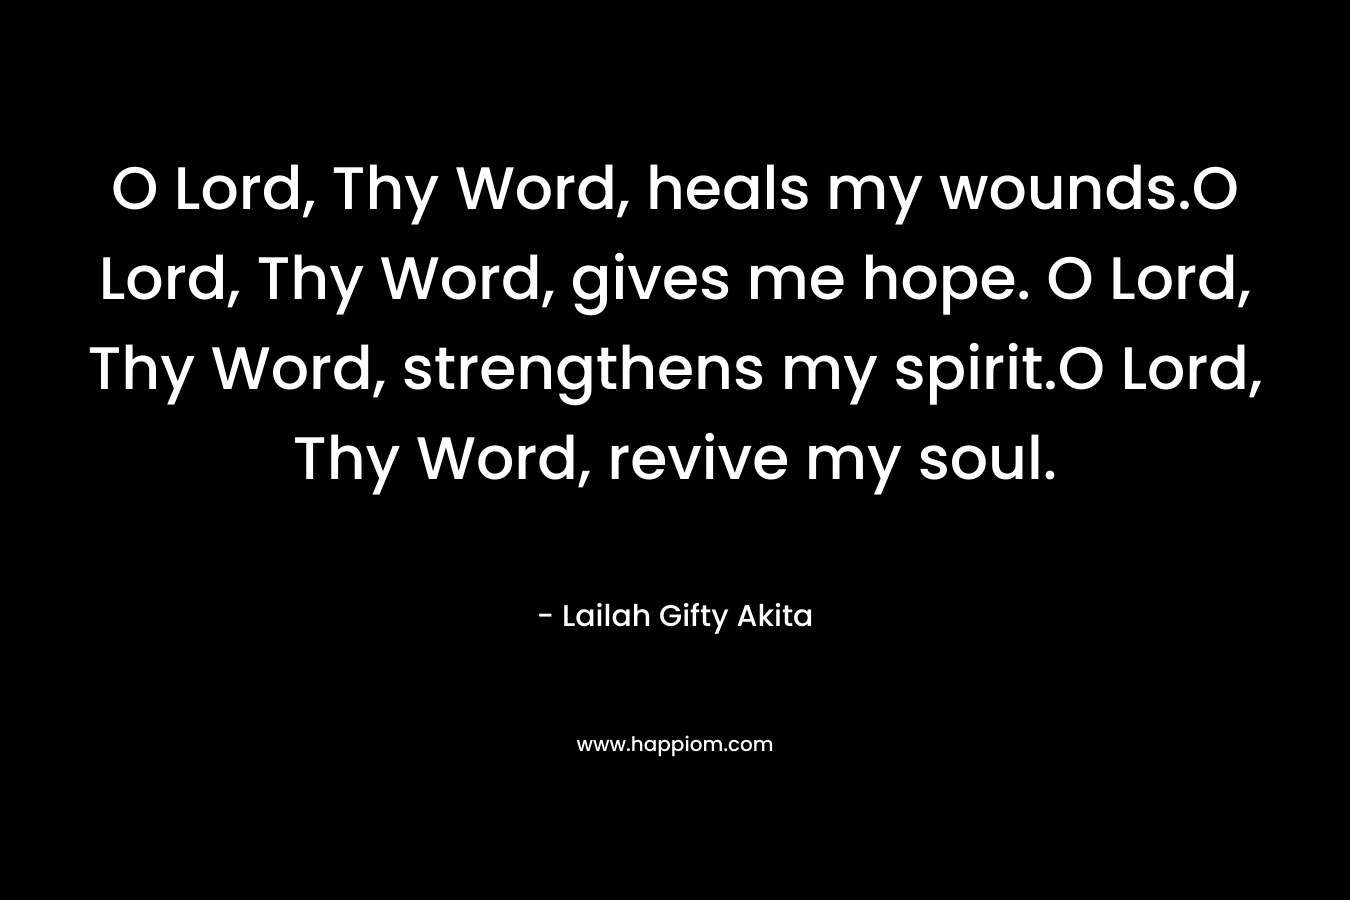 O Lord, Thy Word, heals my wounds.O Lord, Thy Word, gives me hope. O Lord, Thy Word, strengthens my spirit.O Lord, Thy Word, revive my soul.